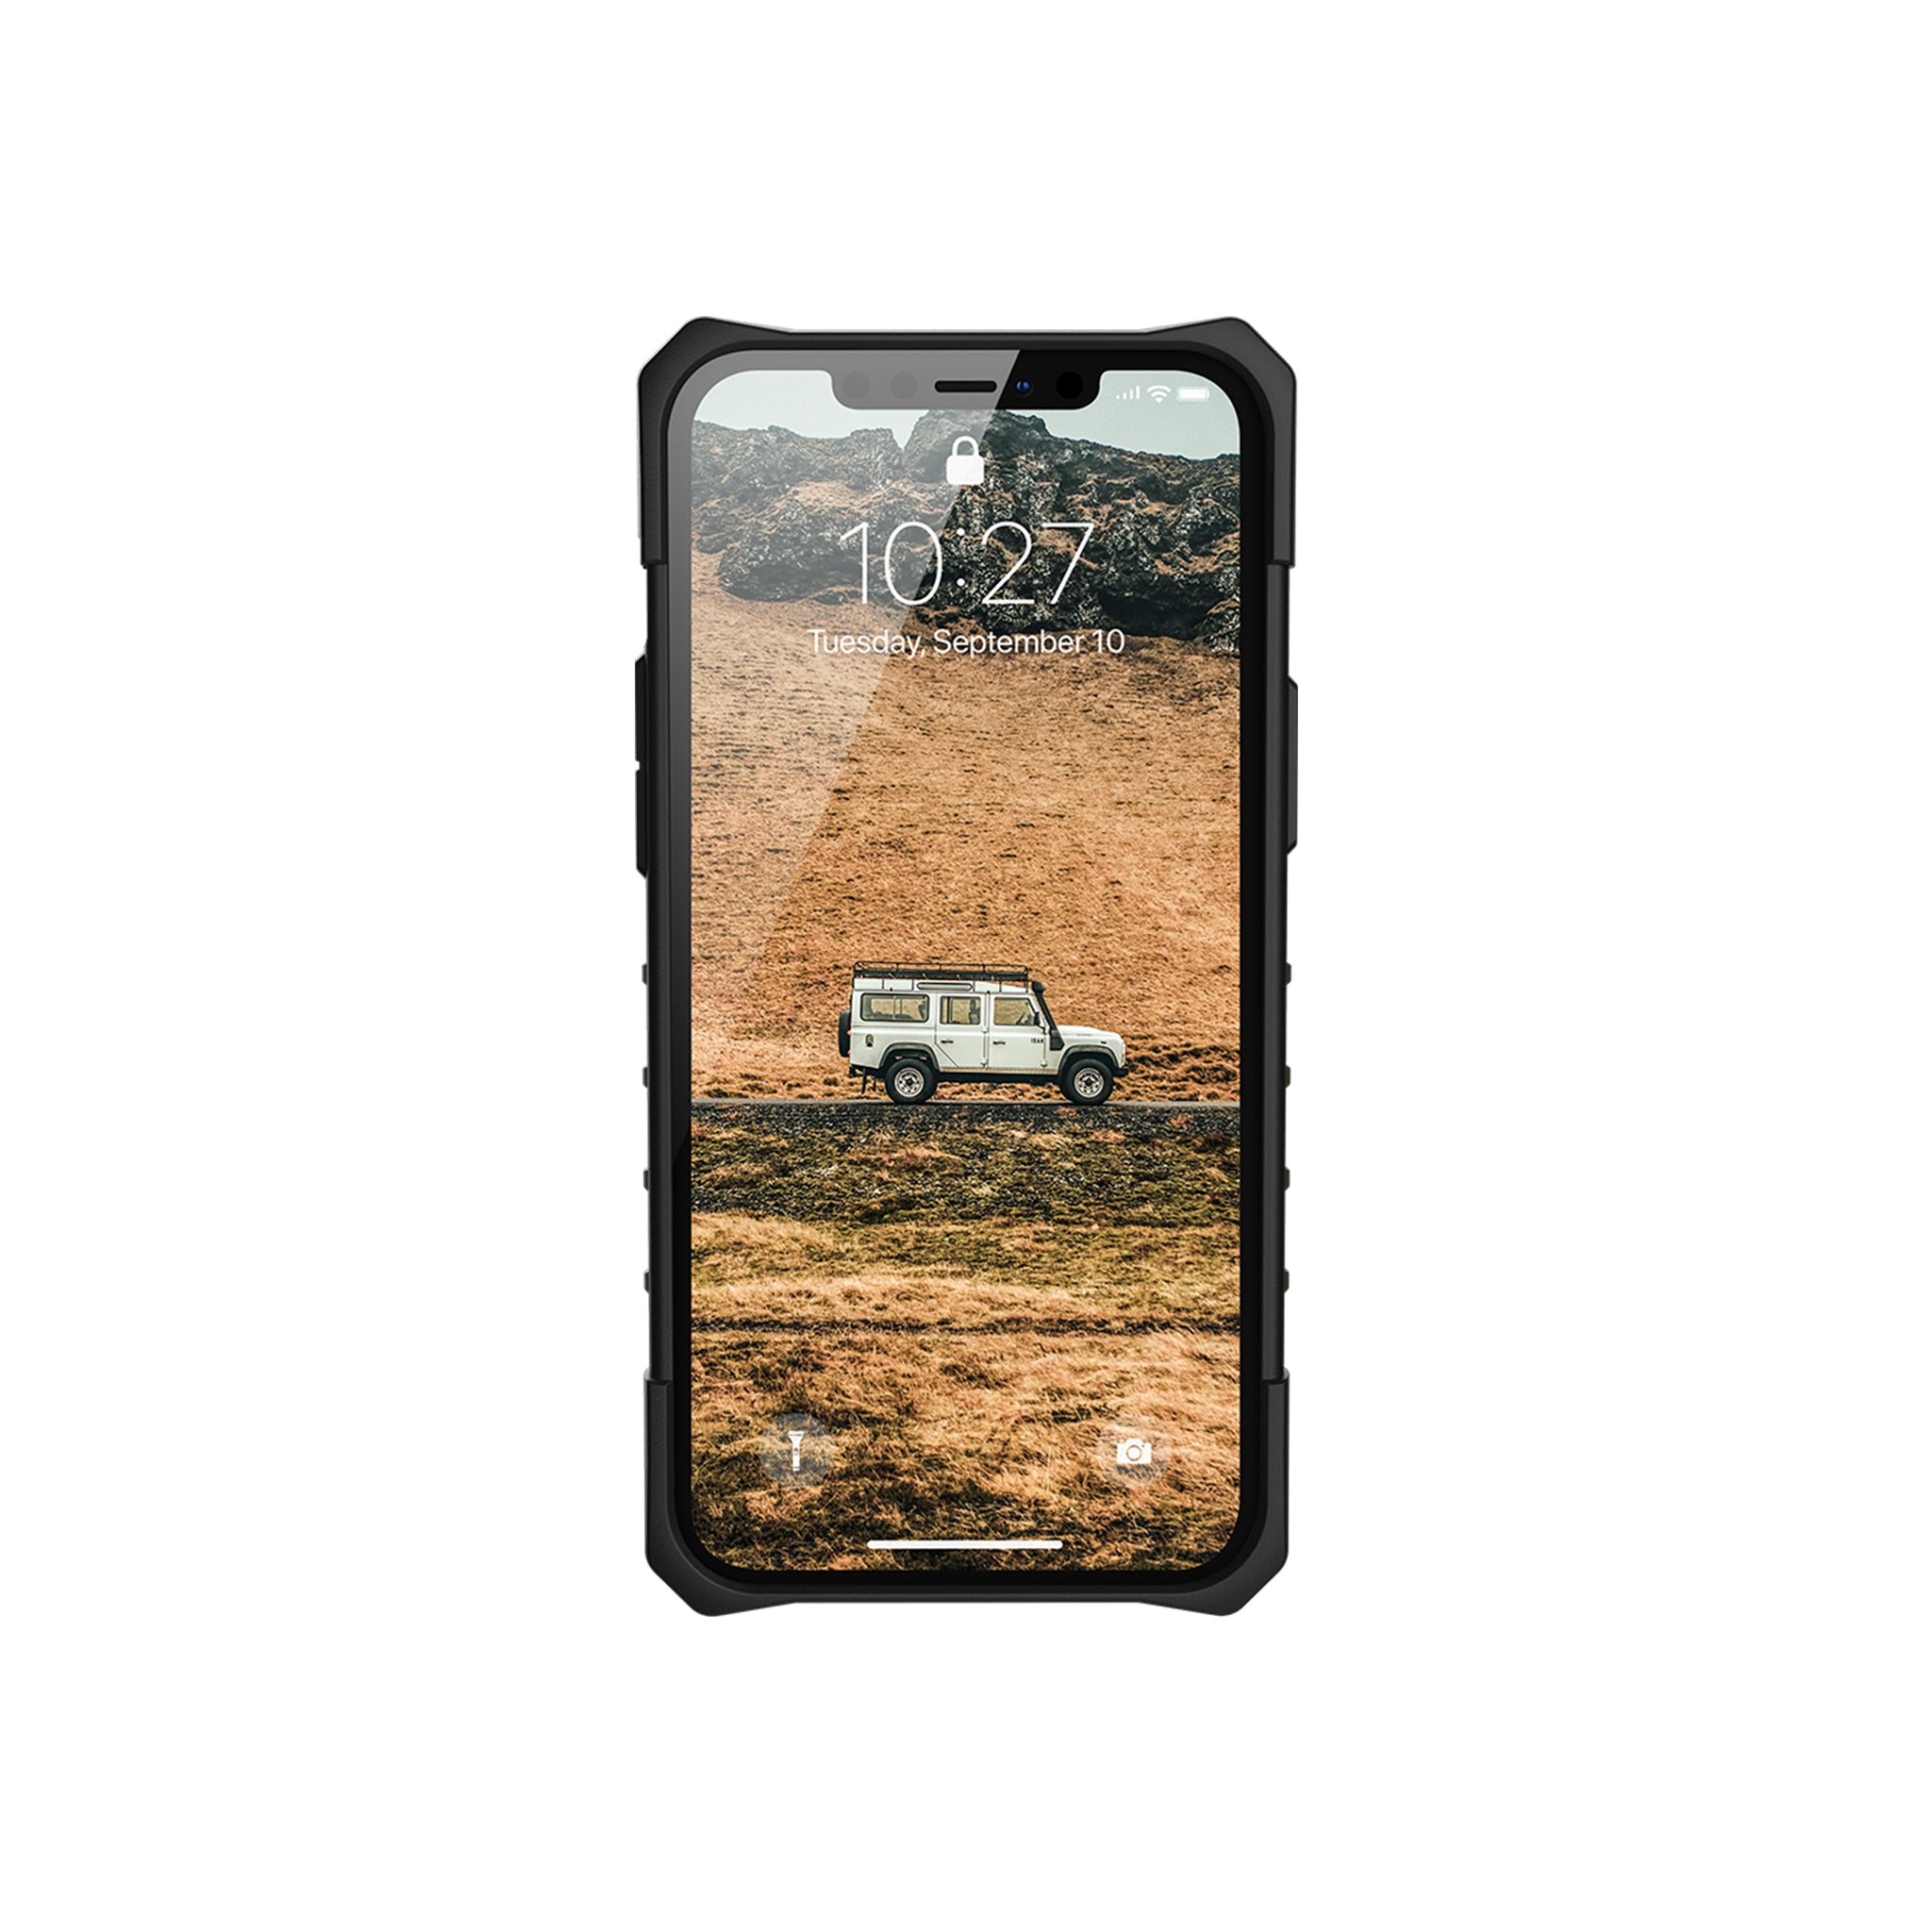 Urban Armor Gear (uag) - Pathfinder Case For Apple Iphone 12 Pro Max - Forest Camo